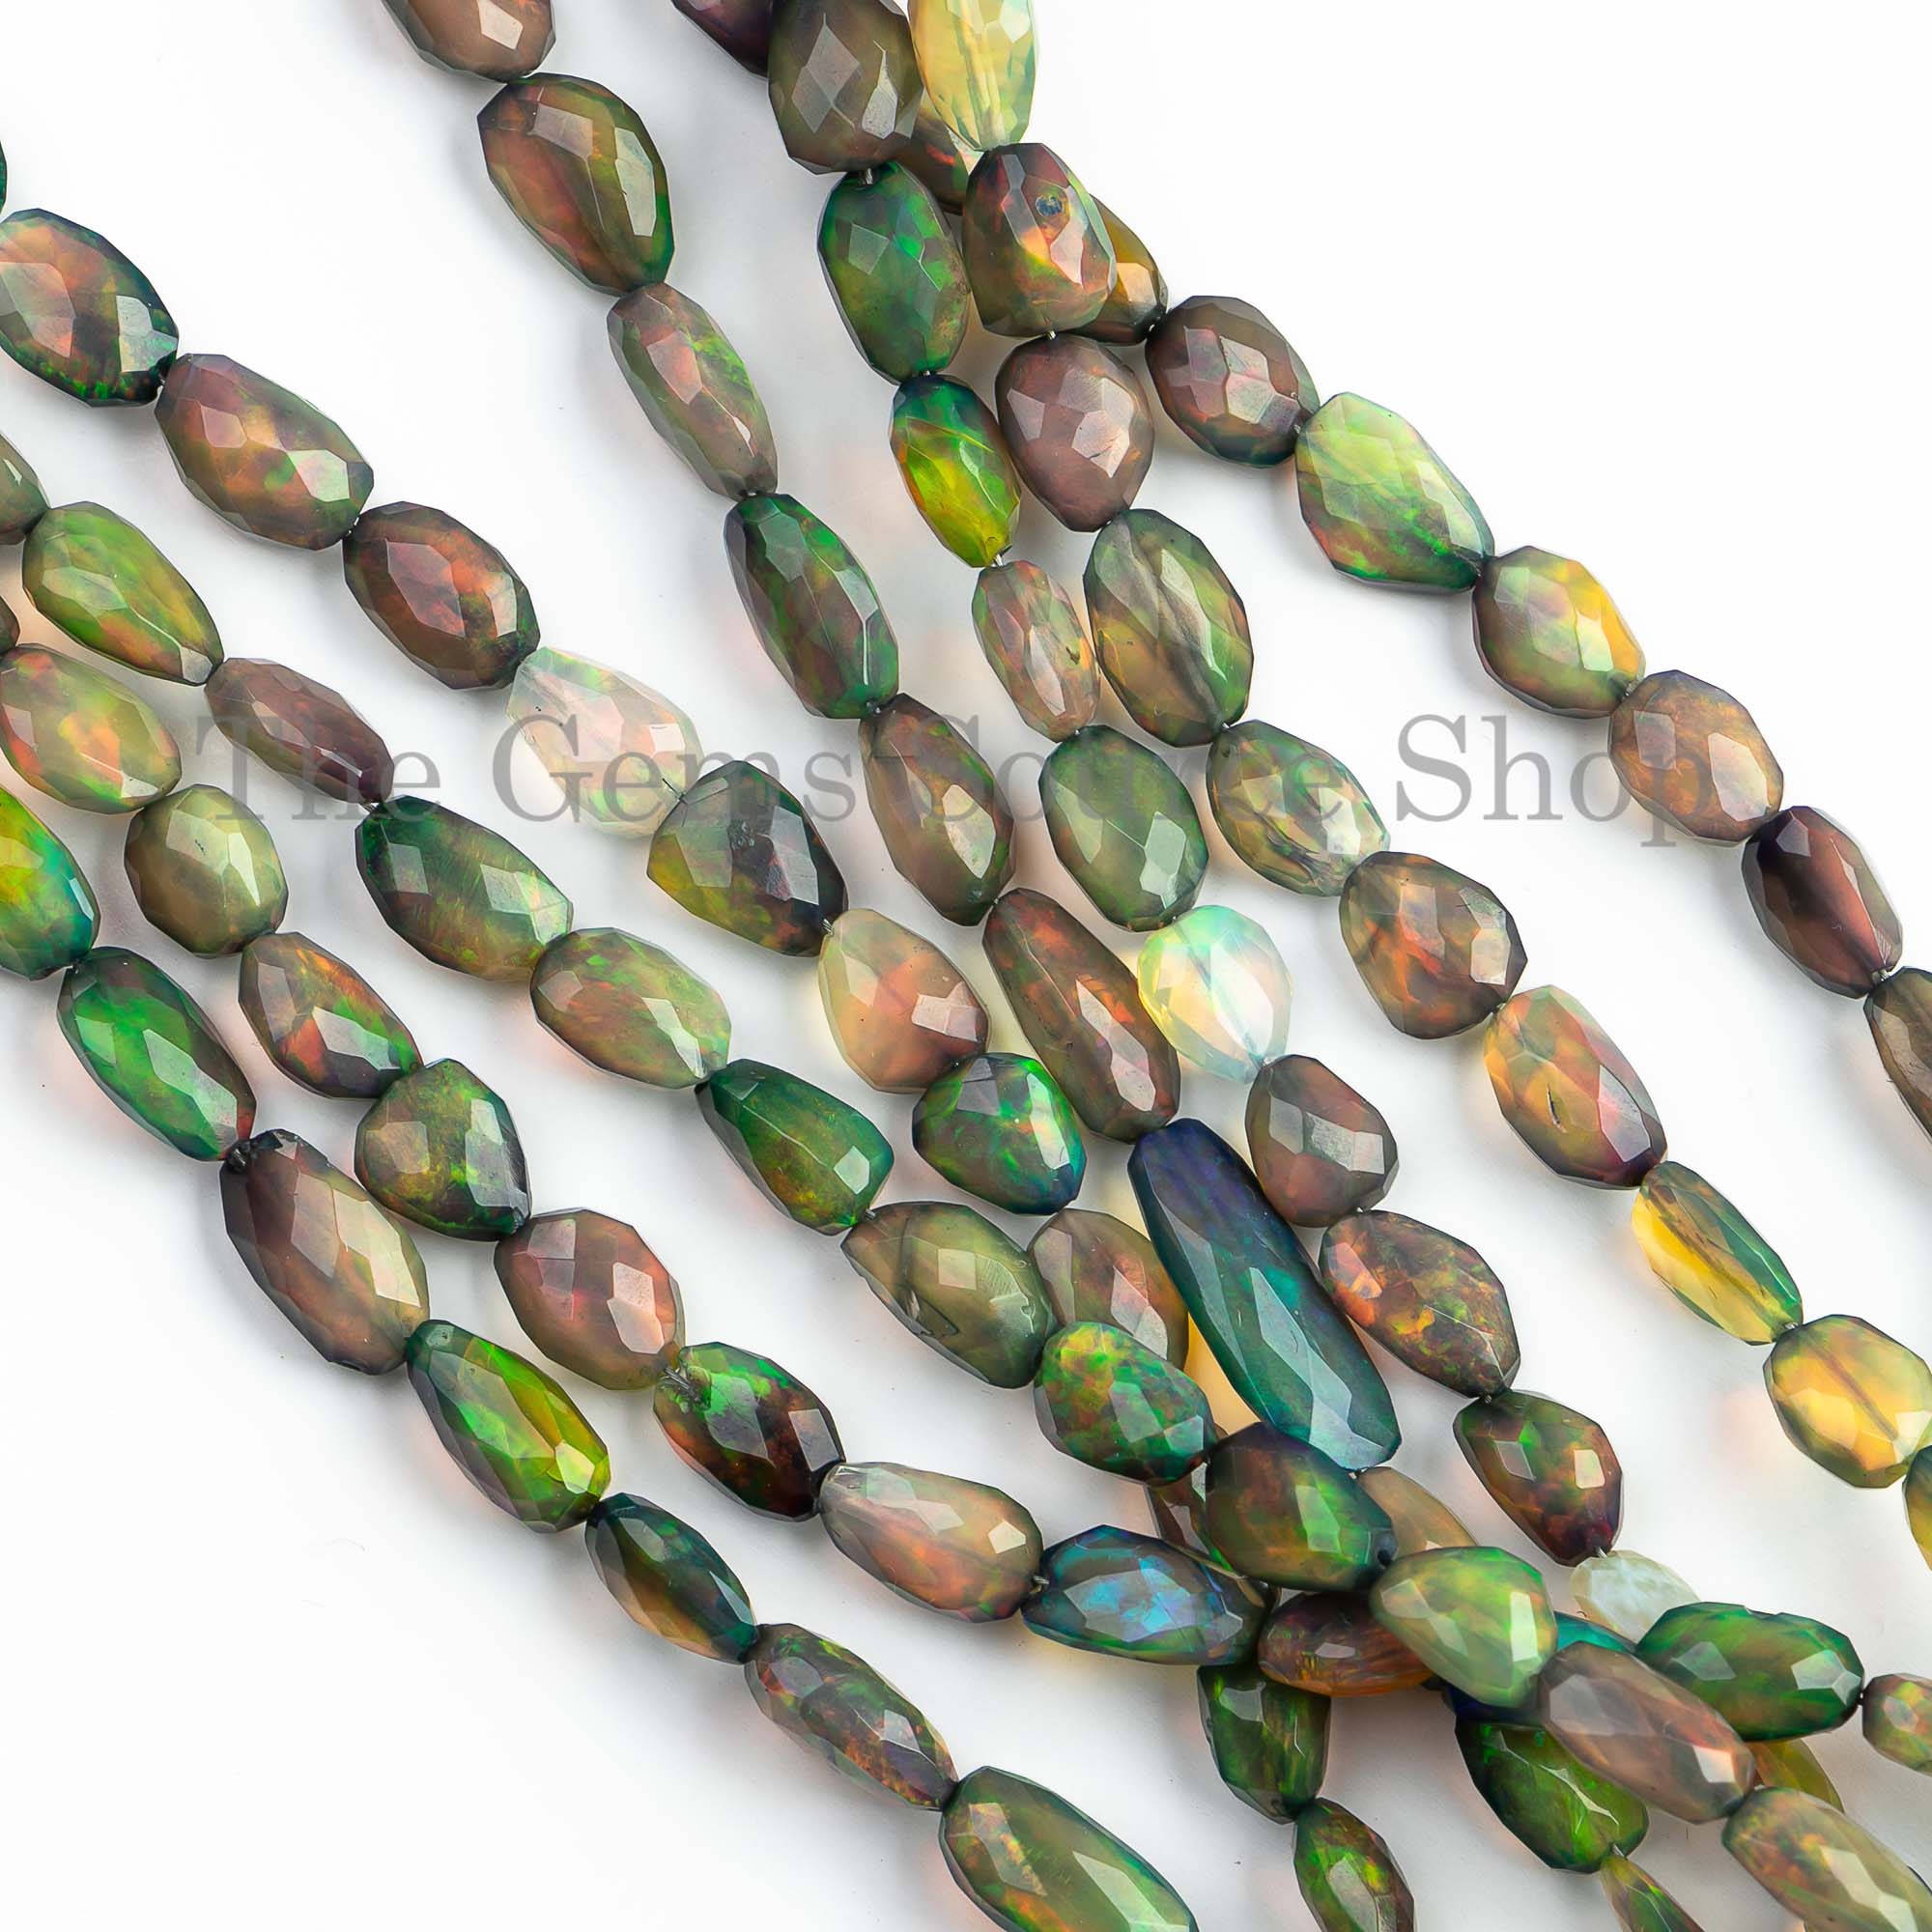 Disco Opal Faceted Nugget Beads, Disco Opal Nugget, Opal Faceted Nugget, Disco Opal Nugget Beads, Opal Beads, Opal Nugget, Nugget Beads